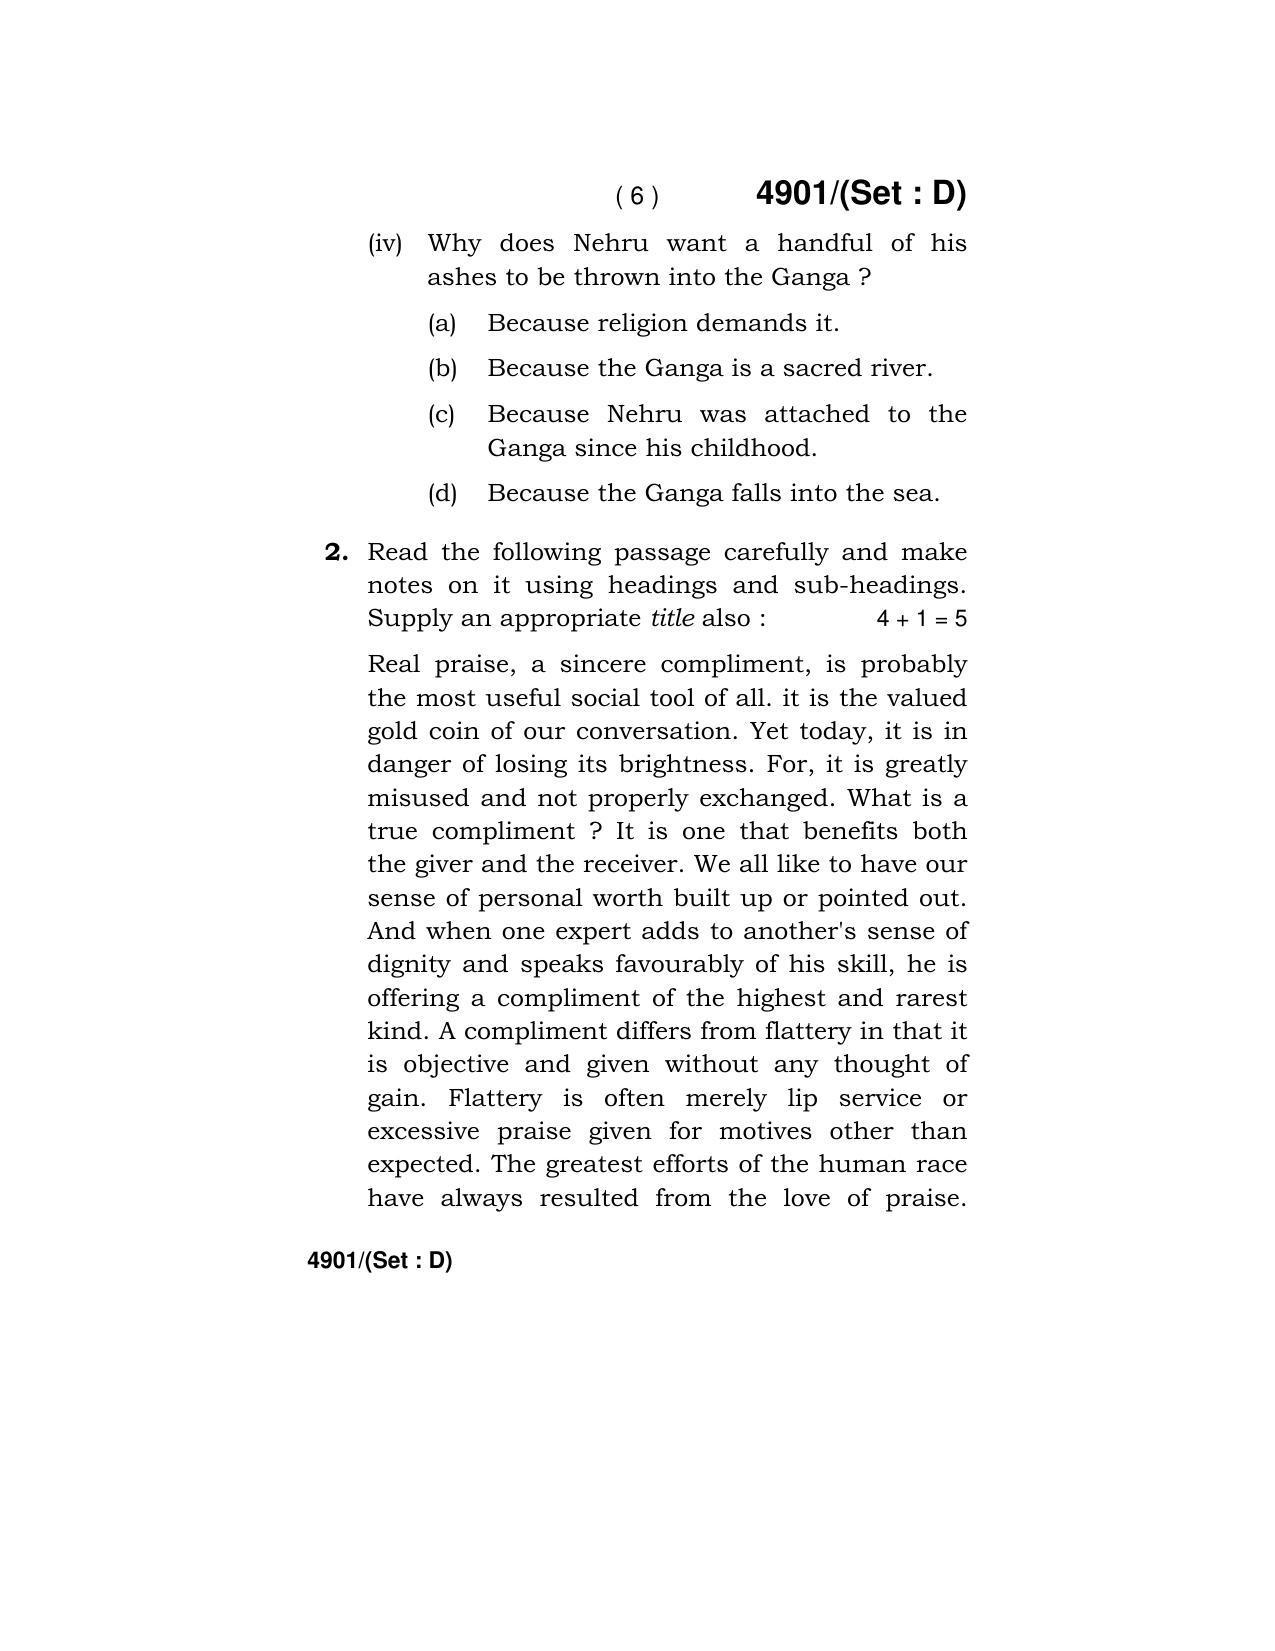 Haryana Board HBSE Class 12 English Core 2020 Question Paper - Page 54